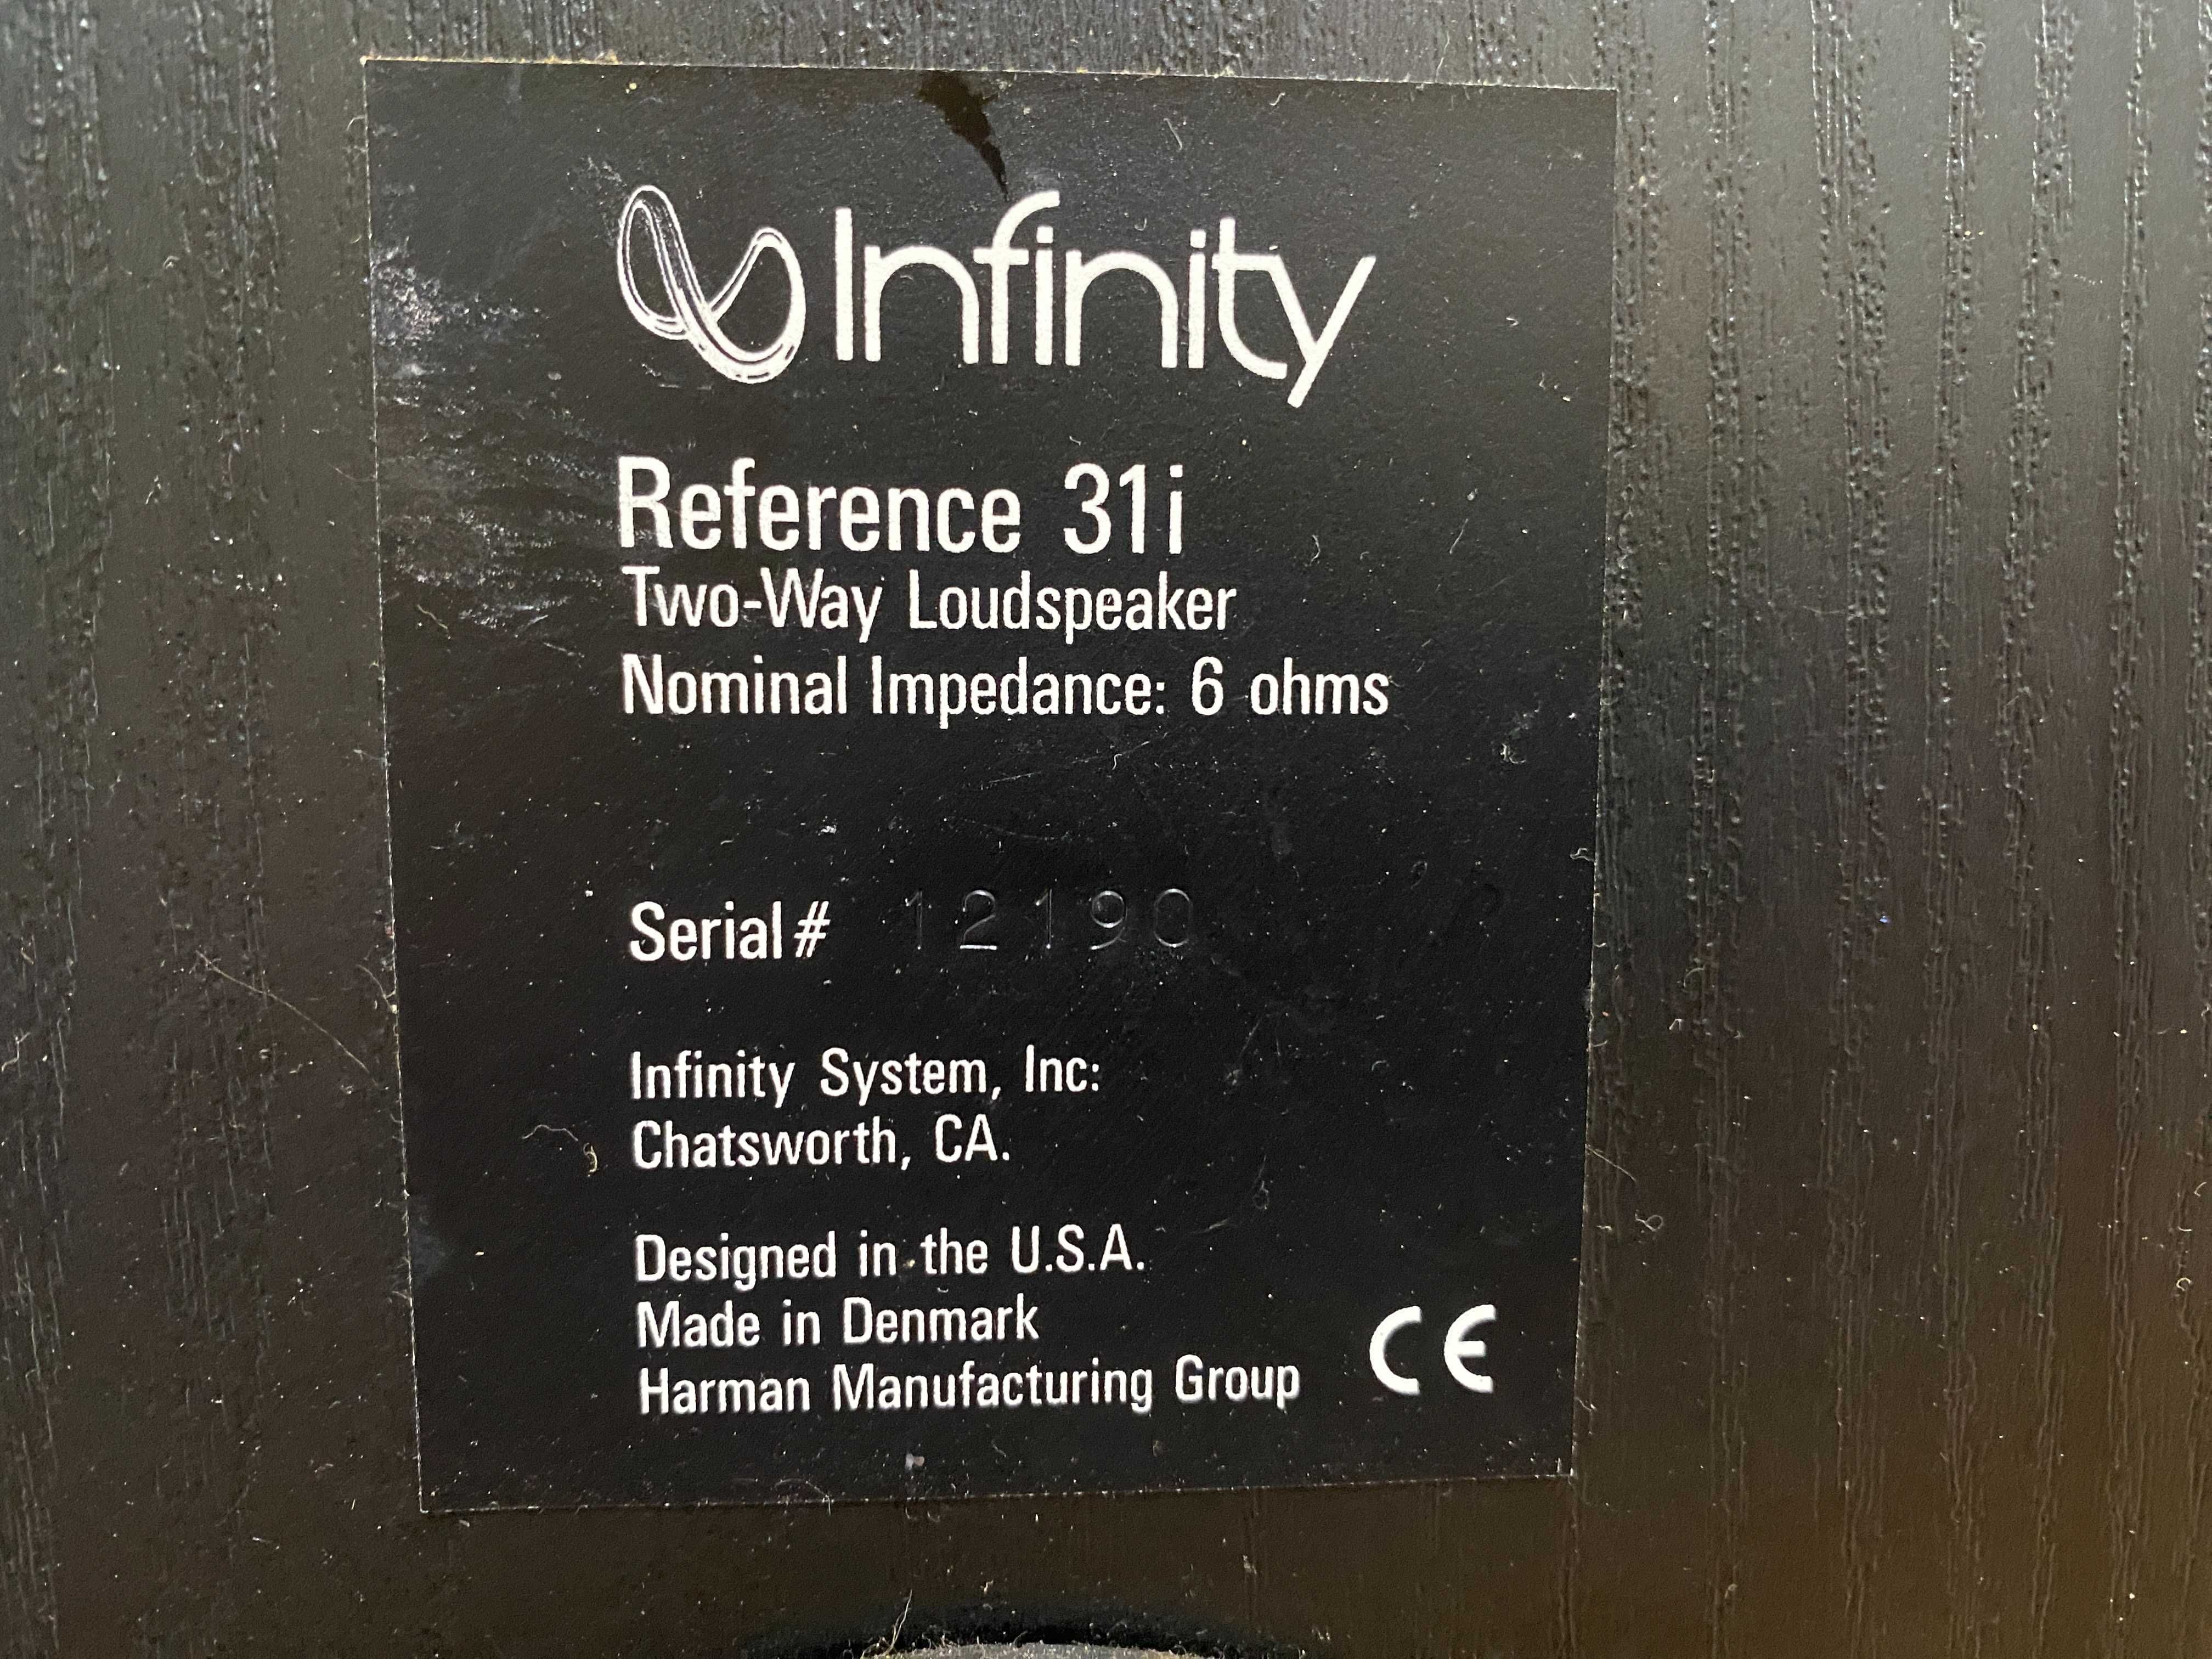 boxe infinity reference 31i